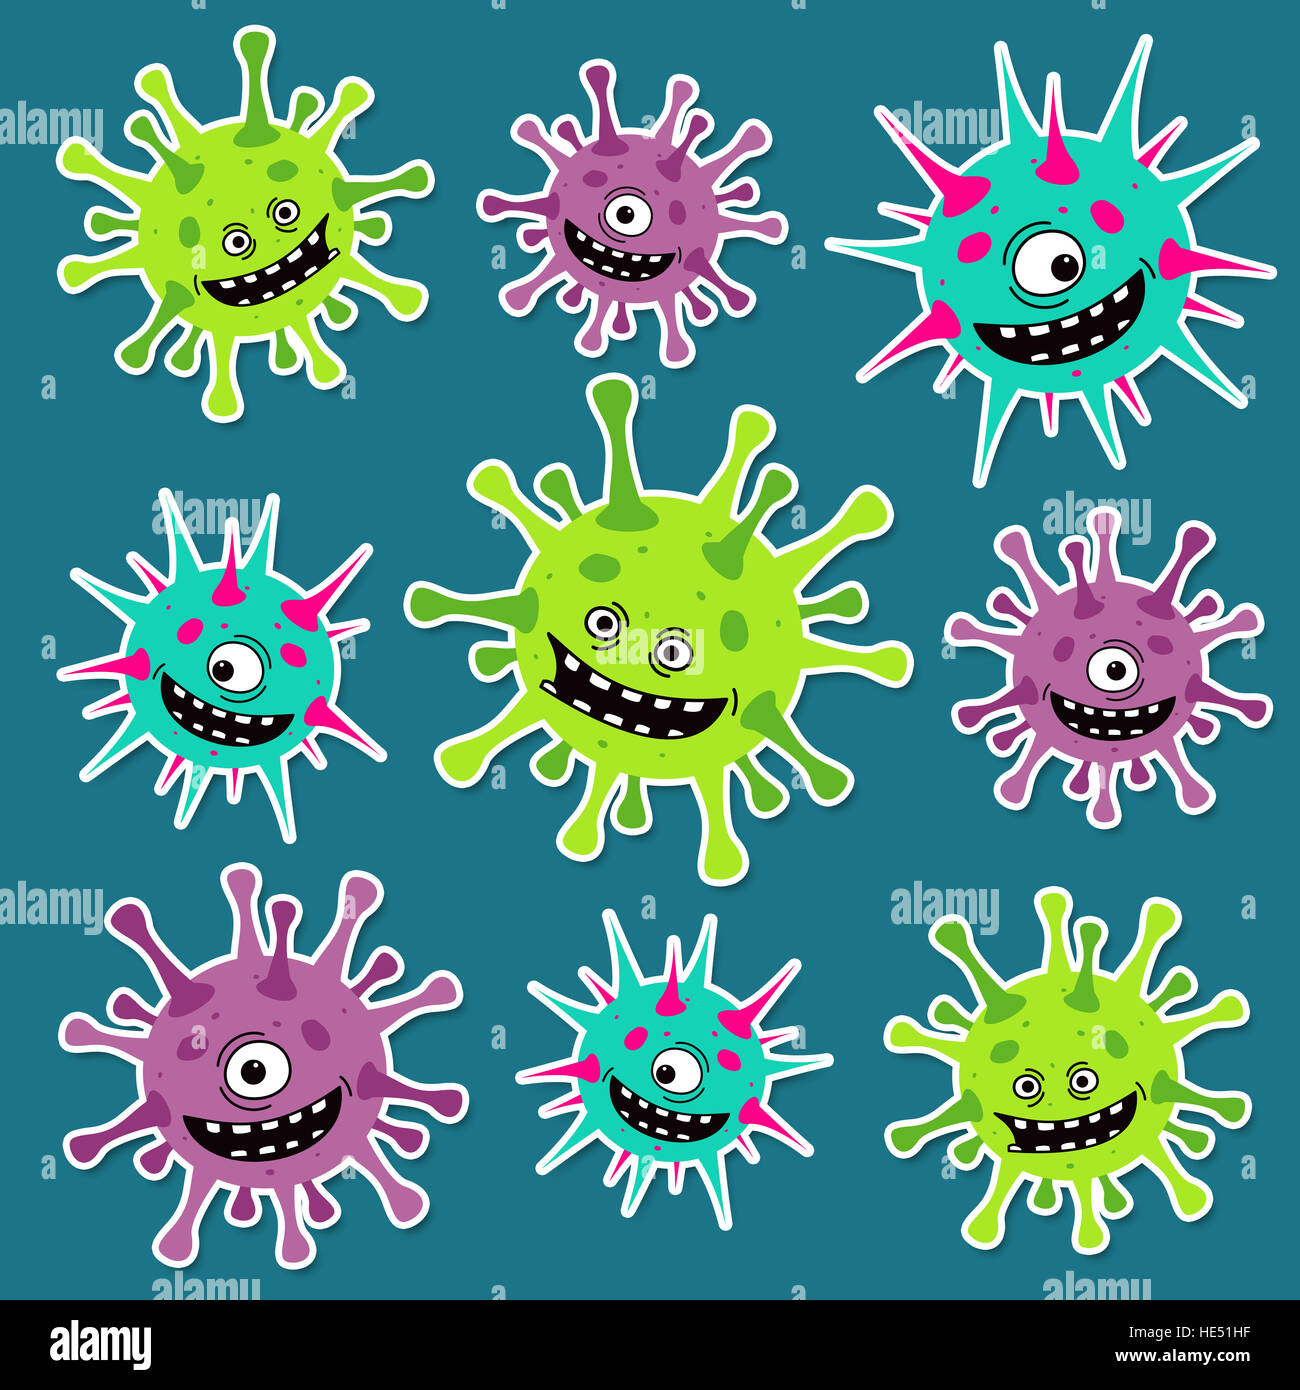 Cartoon viruses, germs or bacteria pattern. Funny colorful set of ...